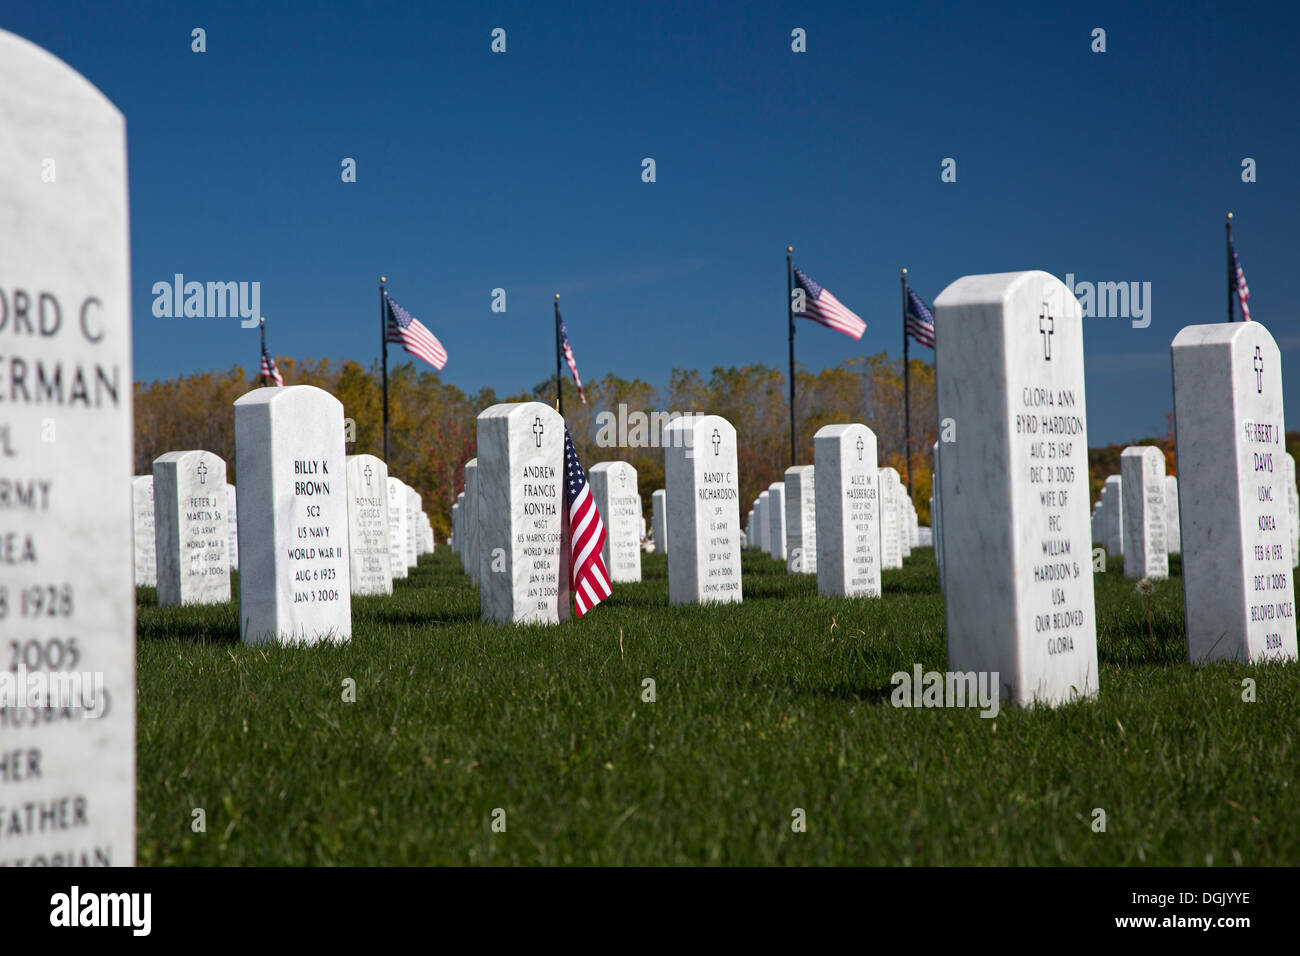 Holly, Michigan - Great Lakes National Cemetery, part of the Veterans Administration system of cemeteries for military veterans. Stock Photo